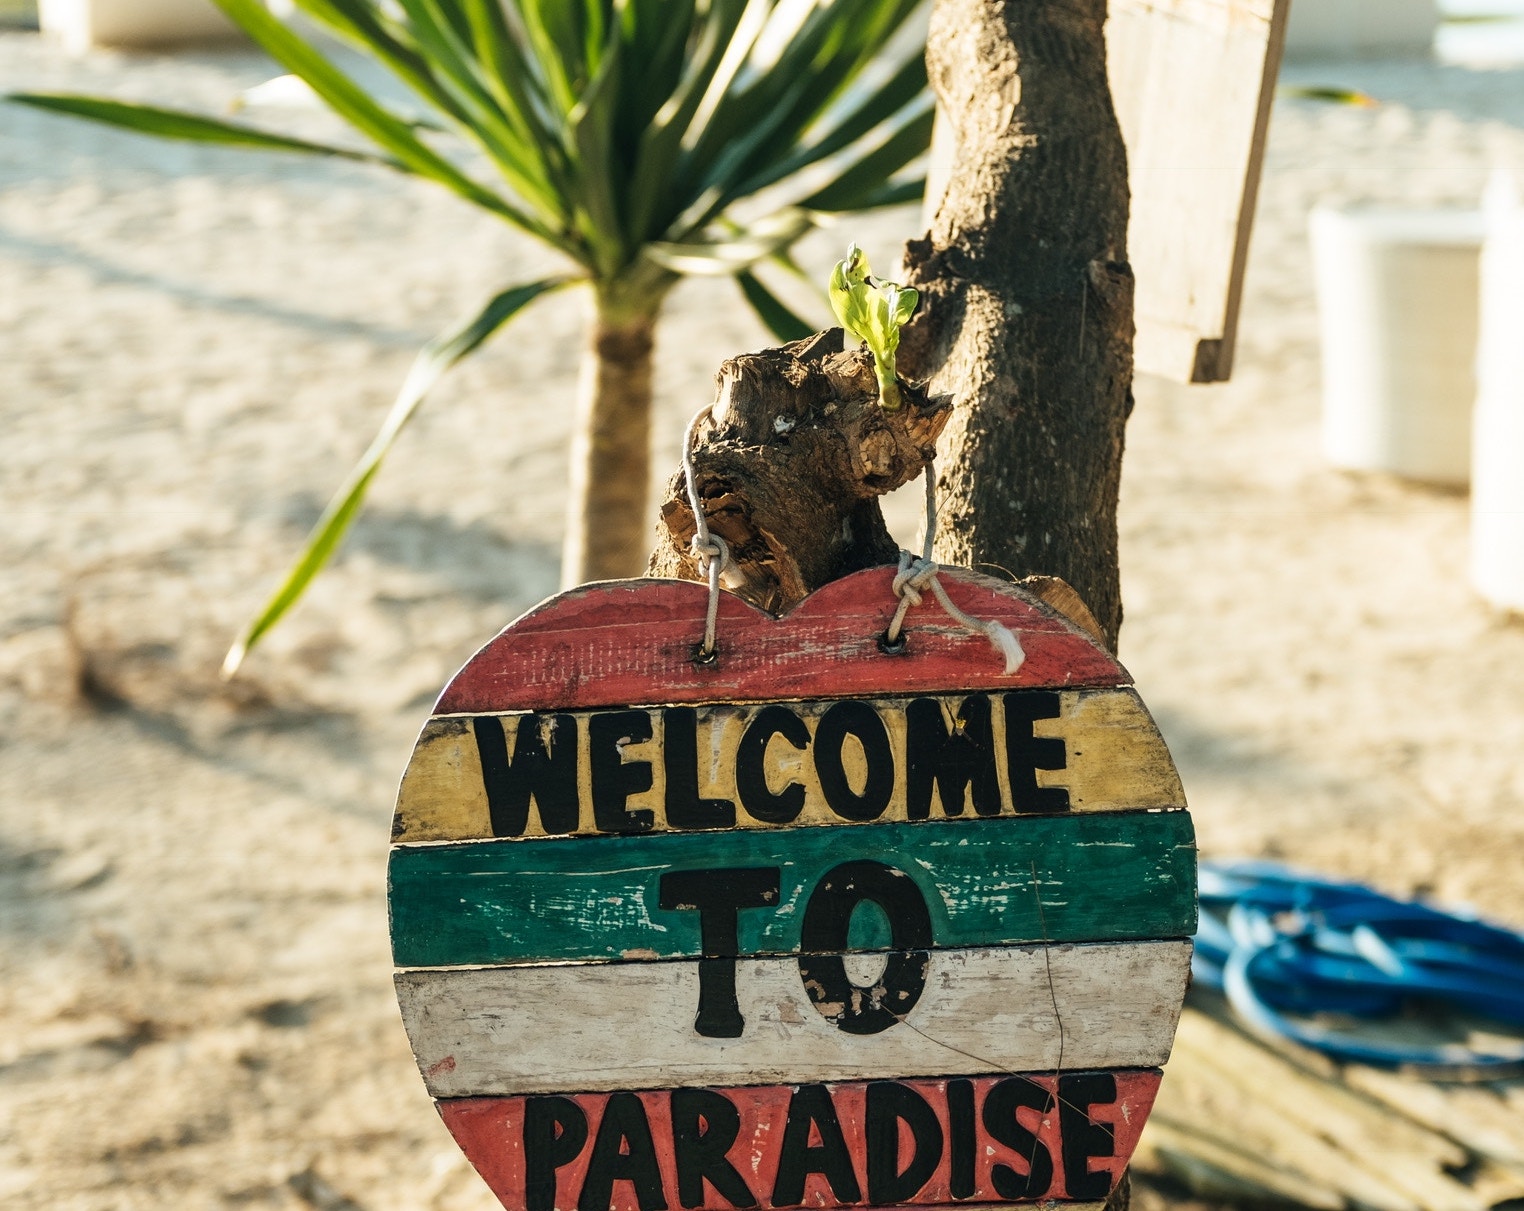 Sign on tree that says "welcome to paradise"